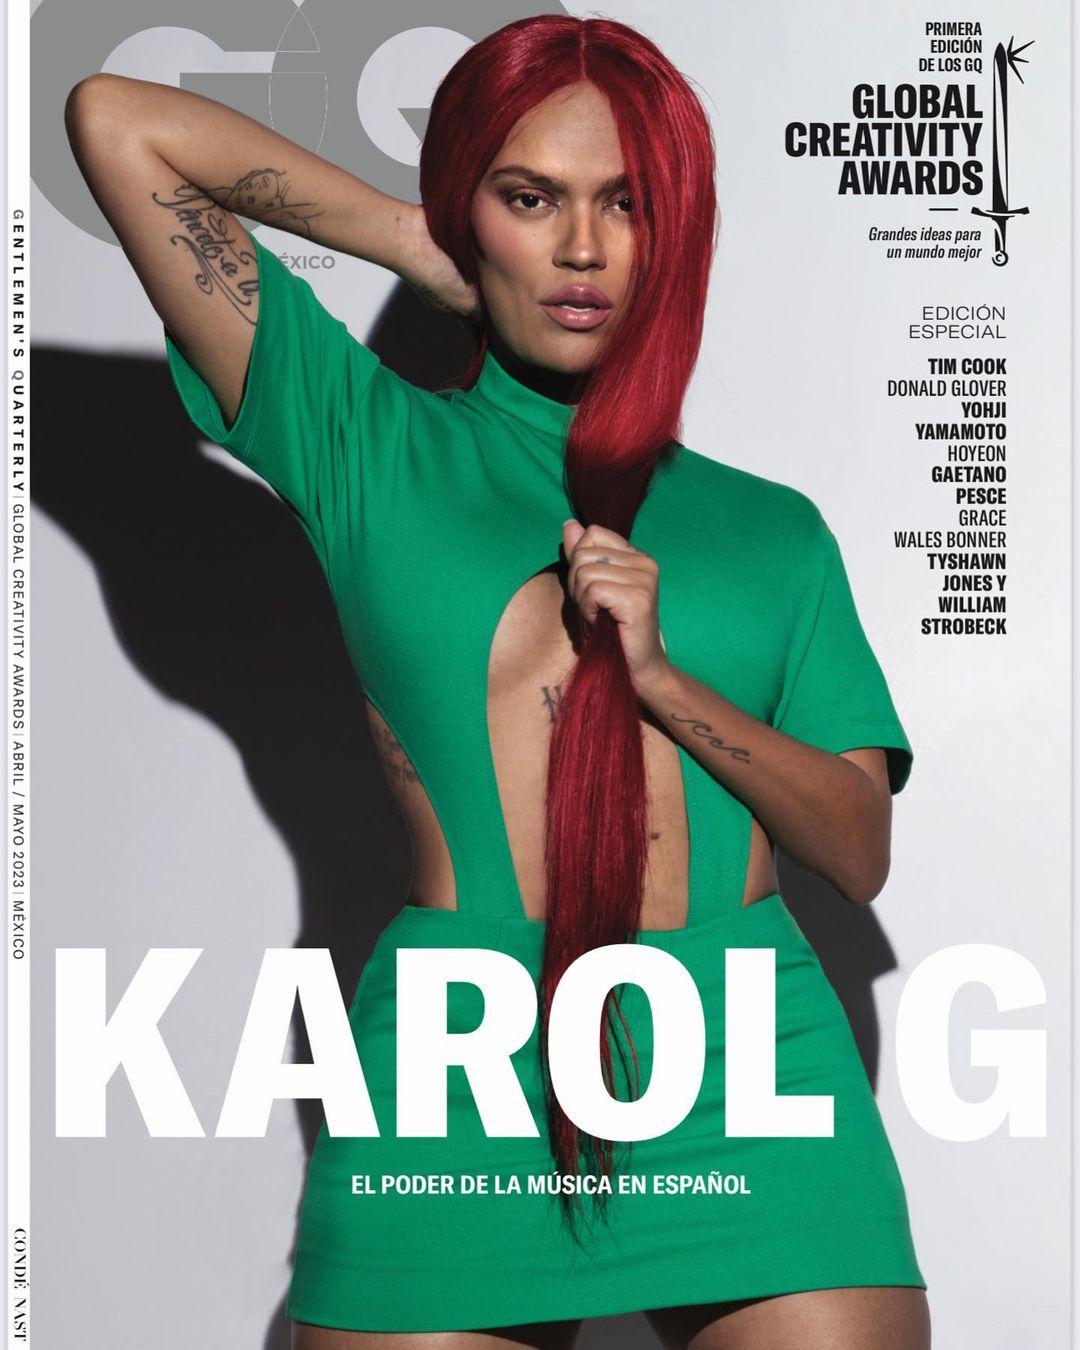 Karol G Disgusted With GQ Magazine For Cover Shoot Blunder